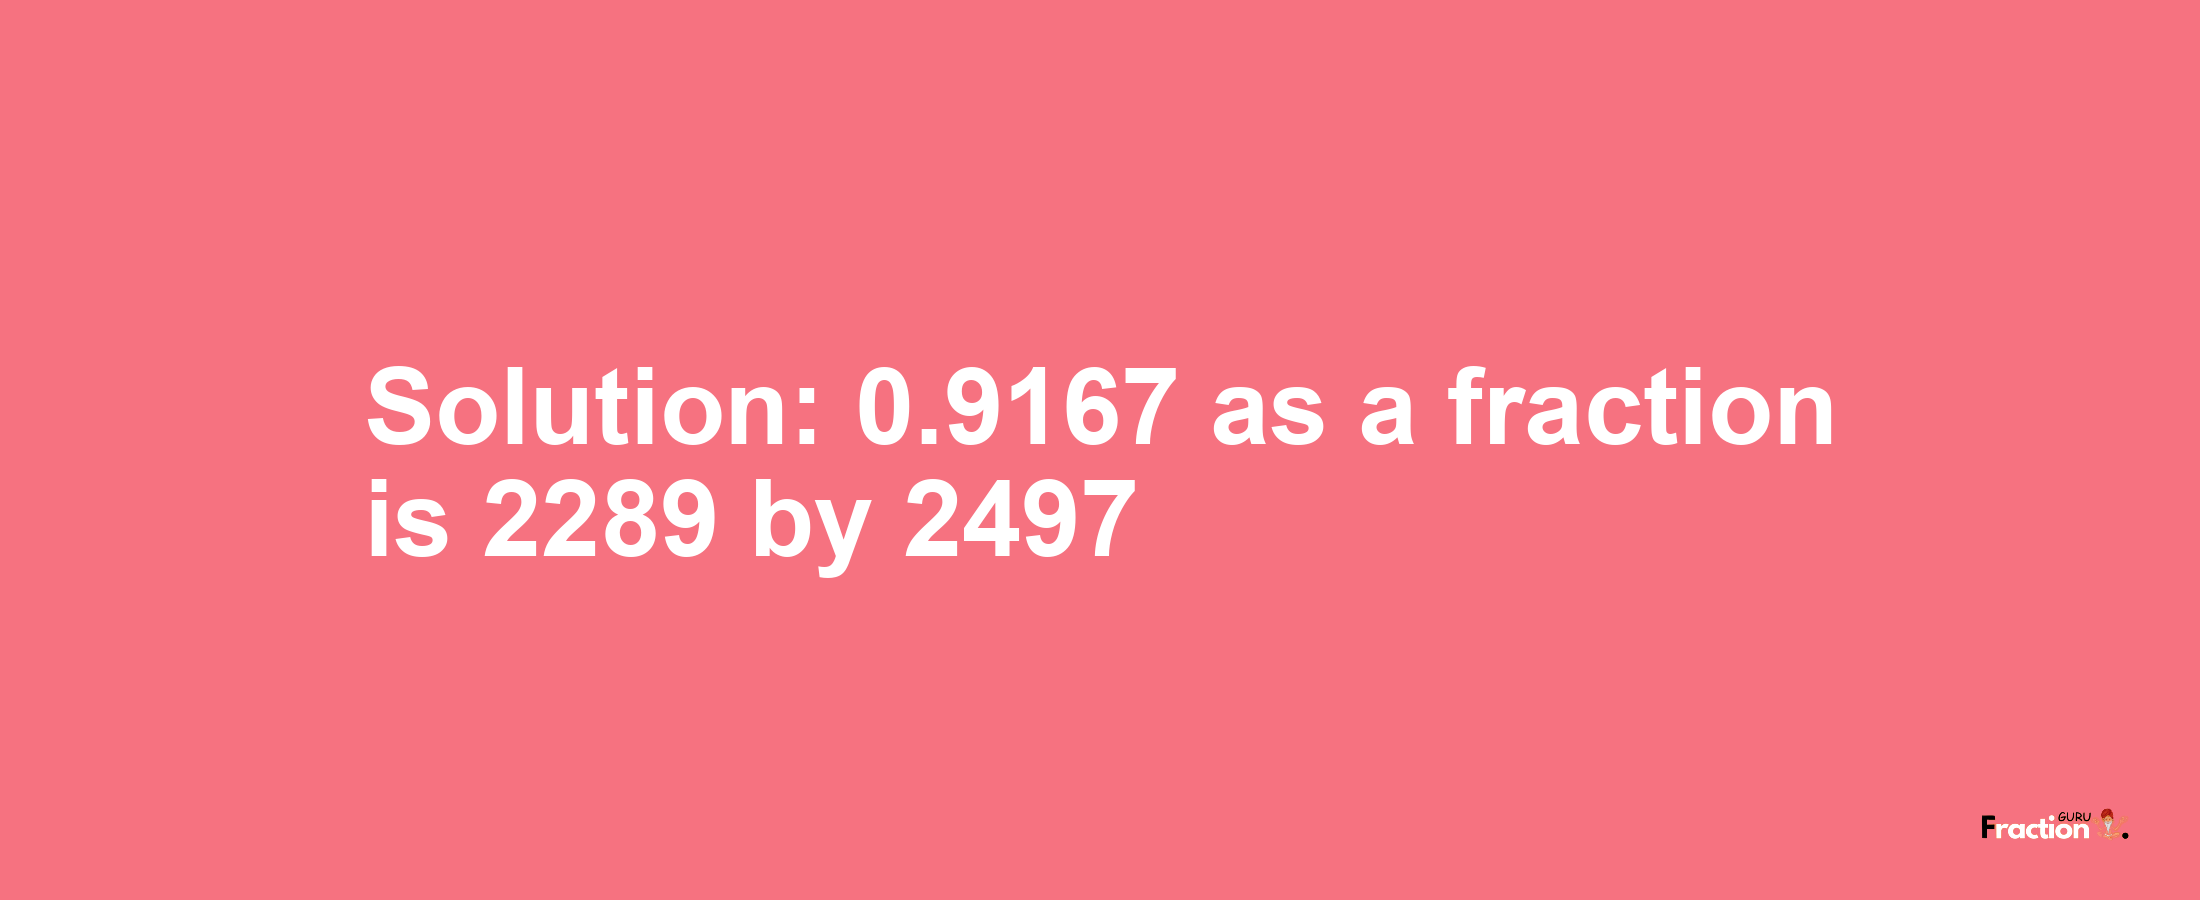 Solution:0.9167 as a fraction is 2289/2497